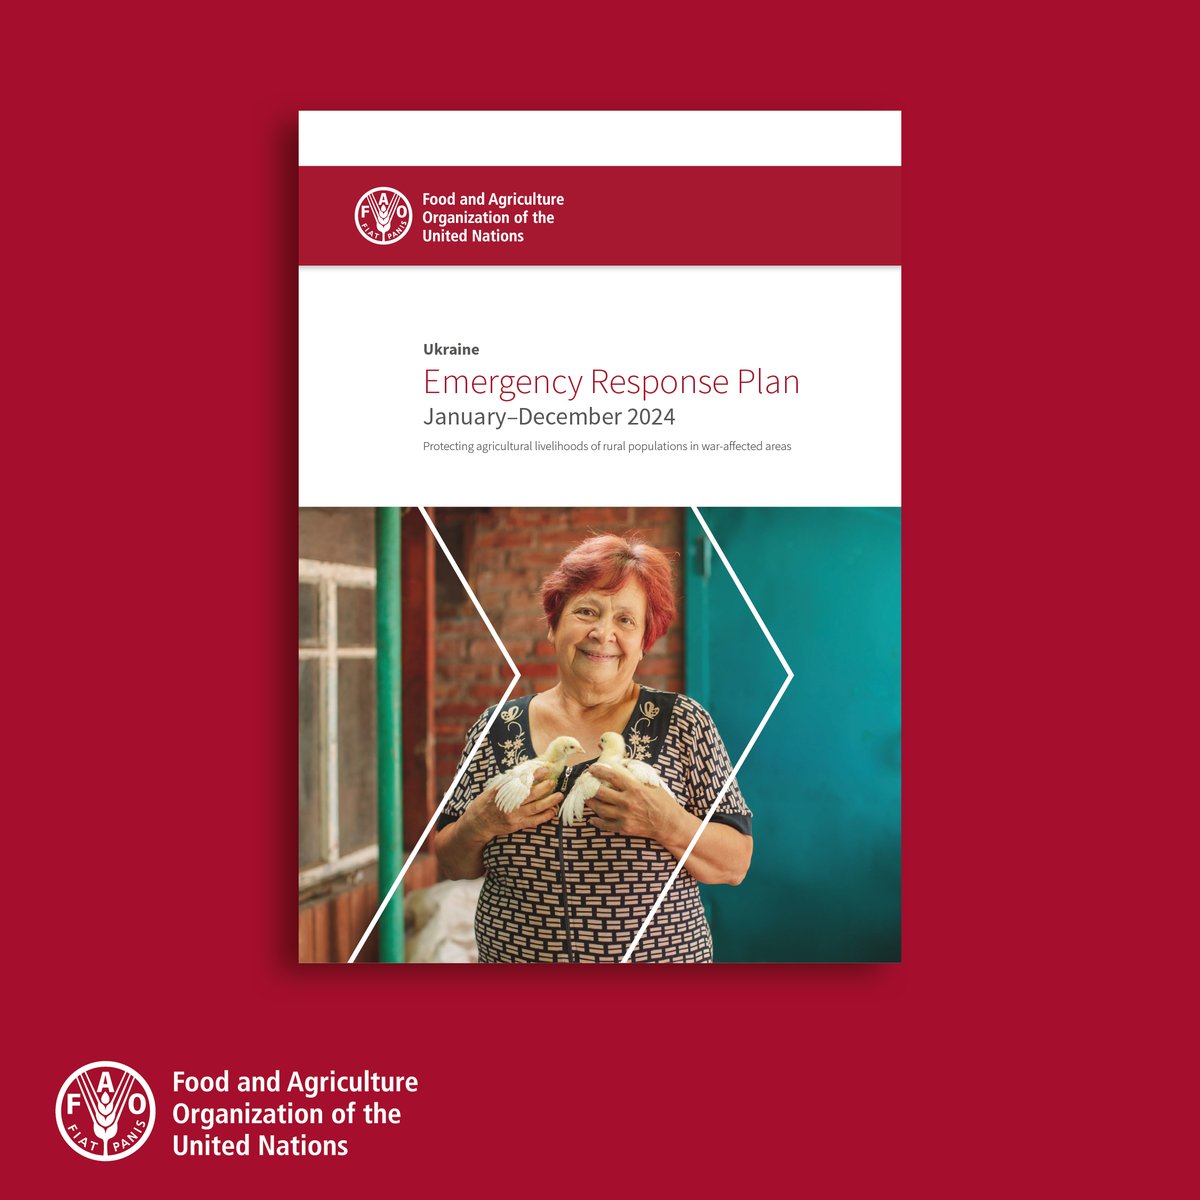 Ukraine: The war continues to exacerbate the vulnerabilities of frontline rural communities. This document provides an overview of the context, @FAO's planned response, expected outcomes, and implementation arrangements of the 2024 ERP. bit.ly/3wCwZ6Y